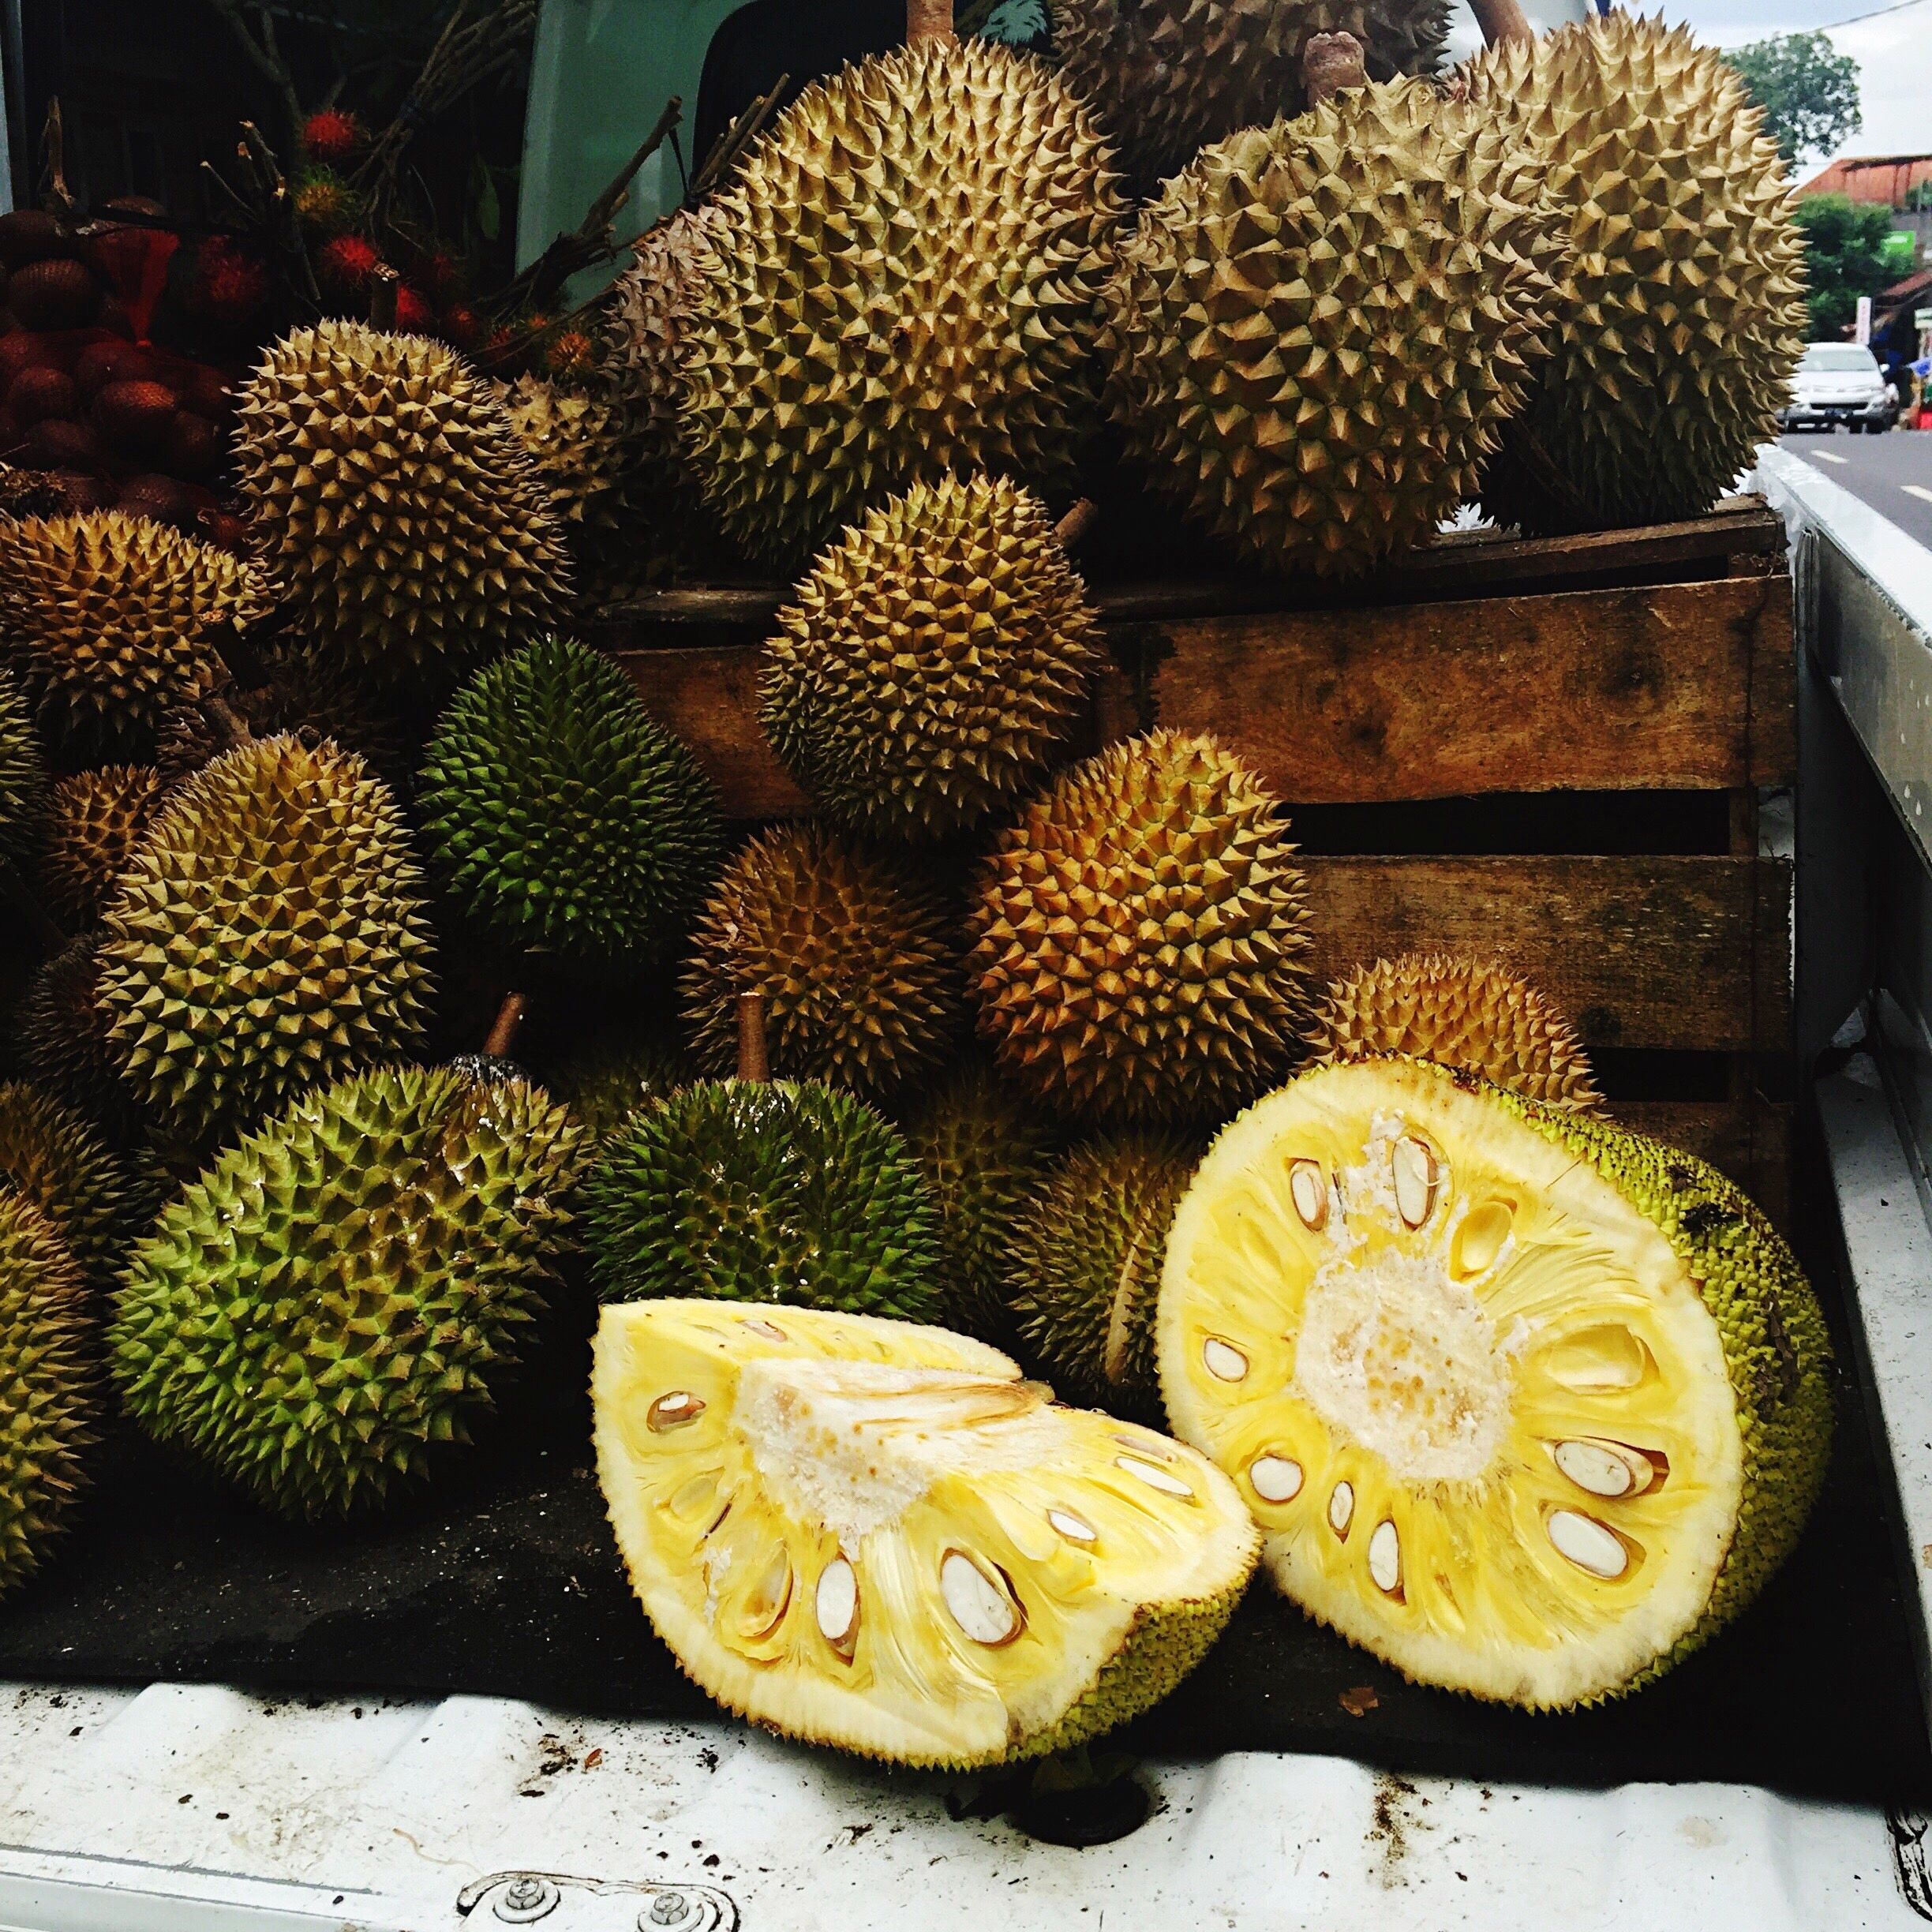 Move aside avocado because jackfruit is the new 'global' fruit in town